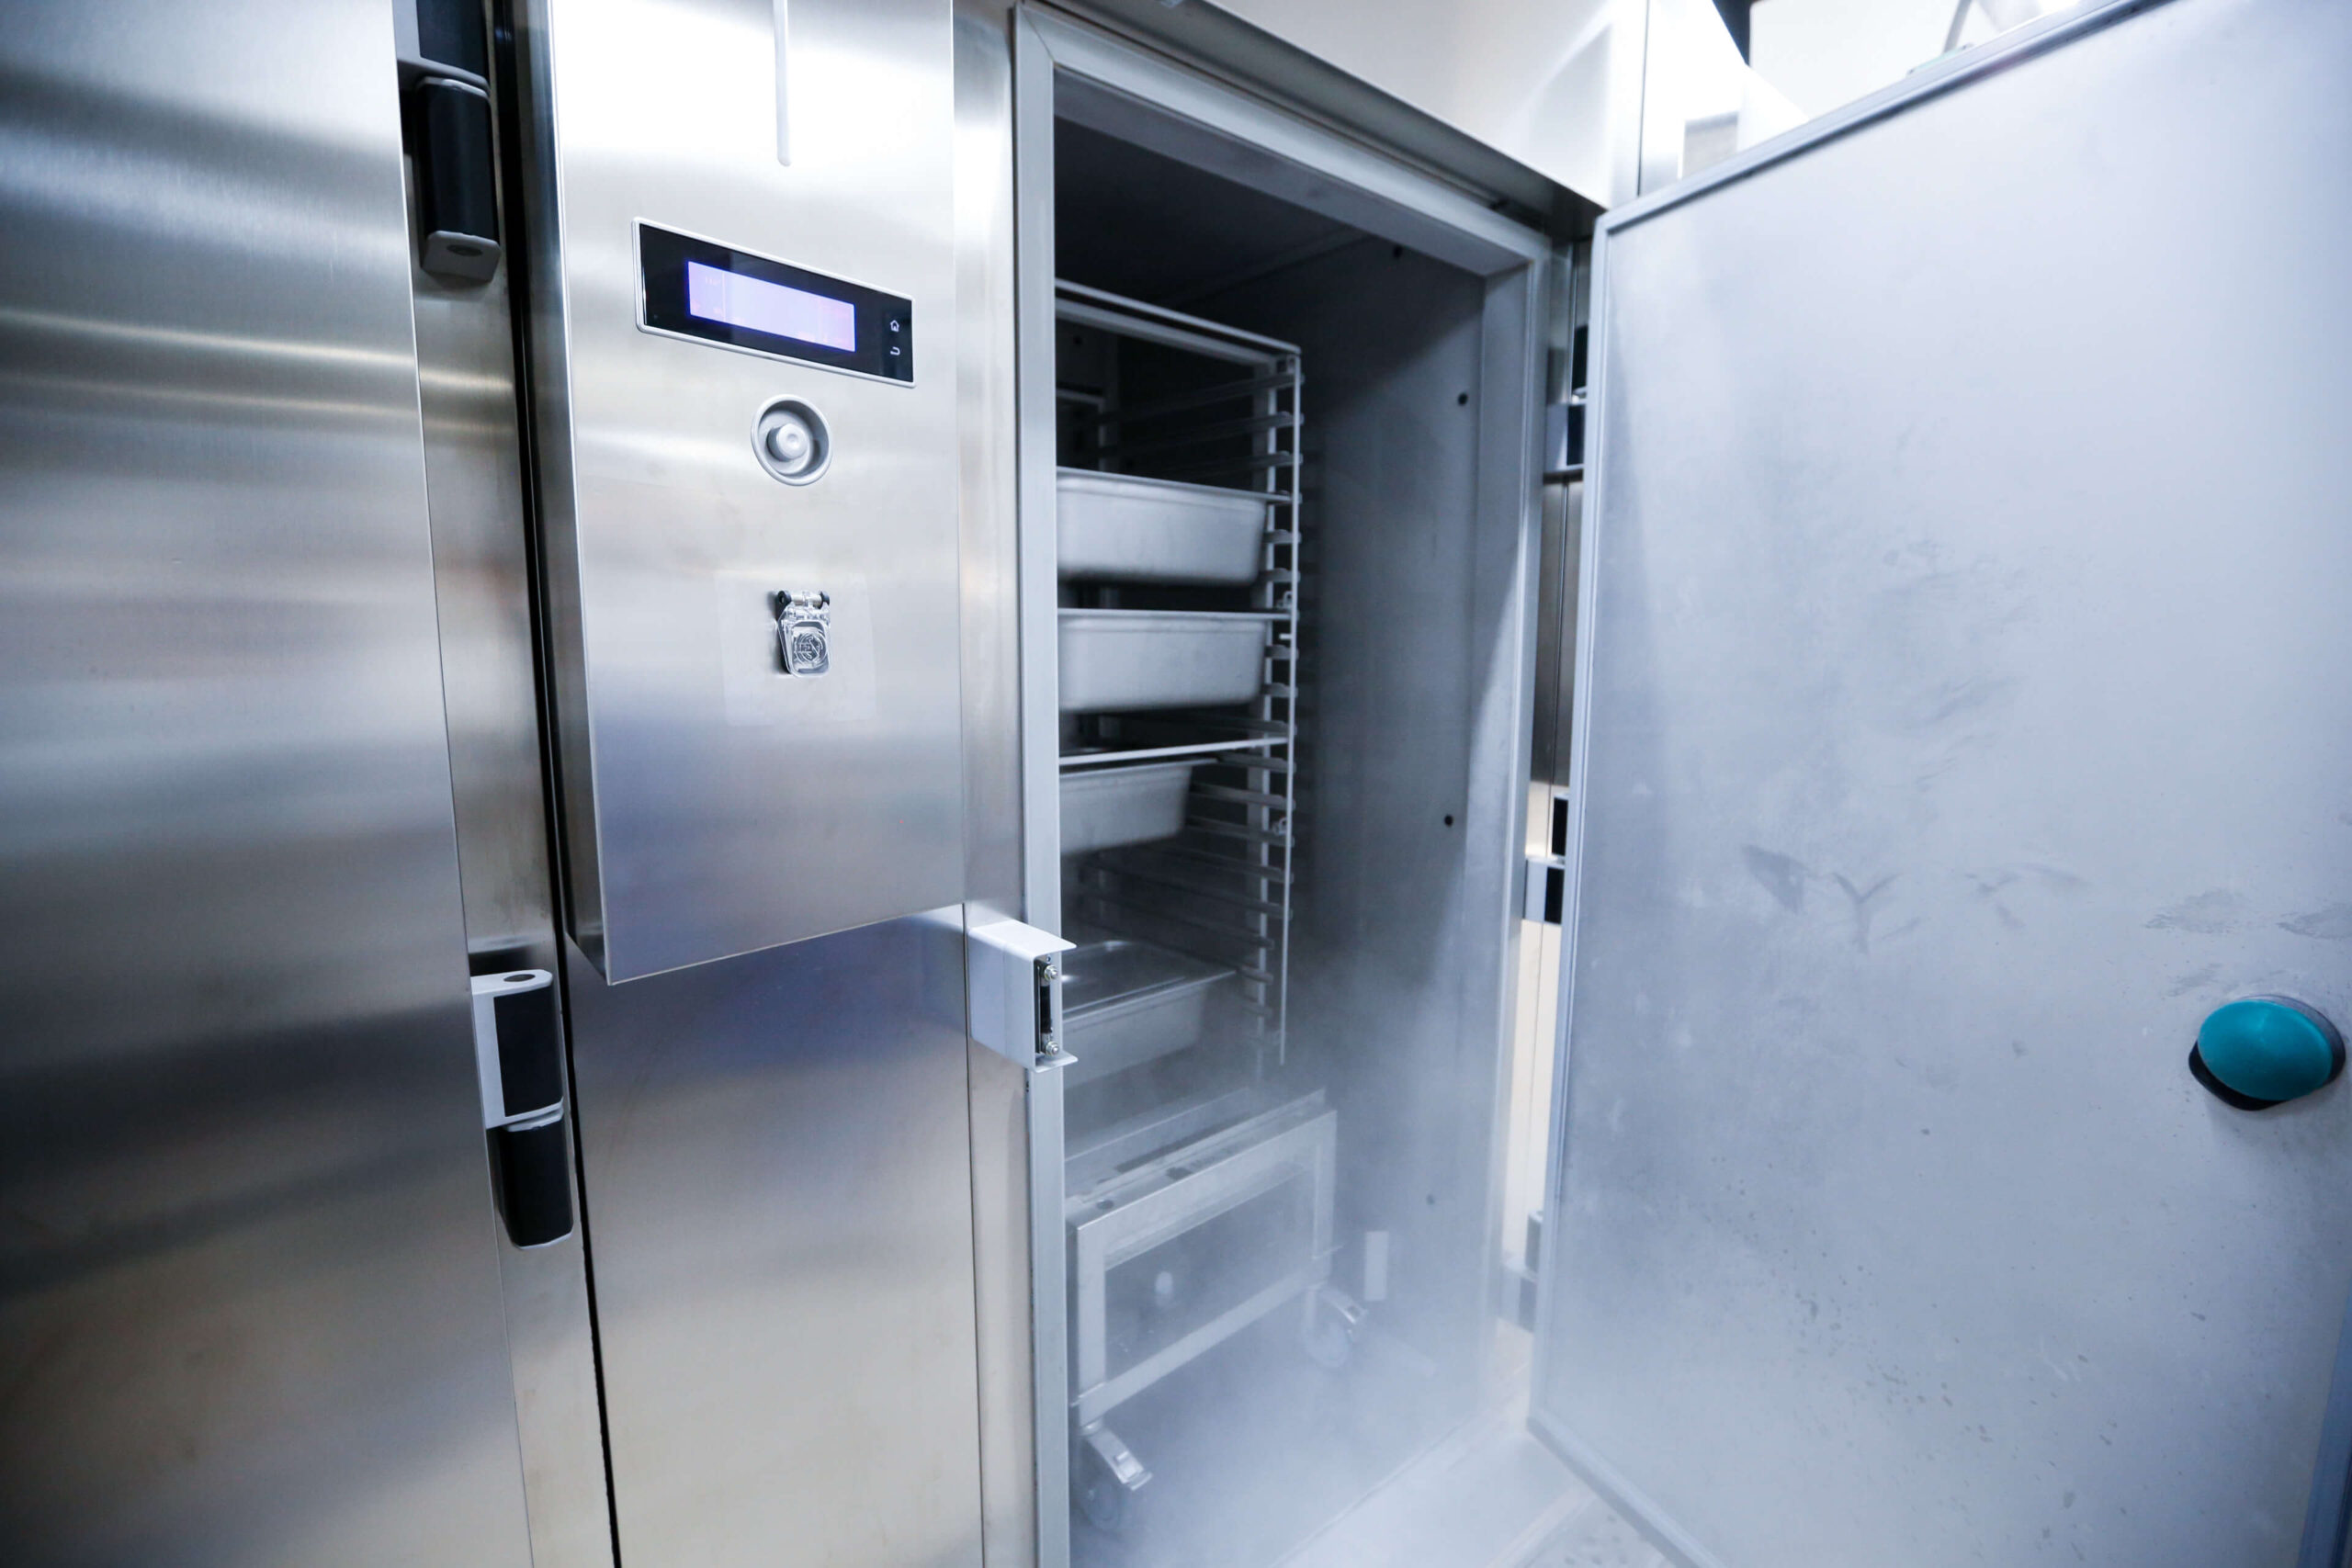 temperature monitoring systems with Wi-Fi for commercial freezer